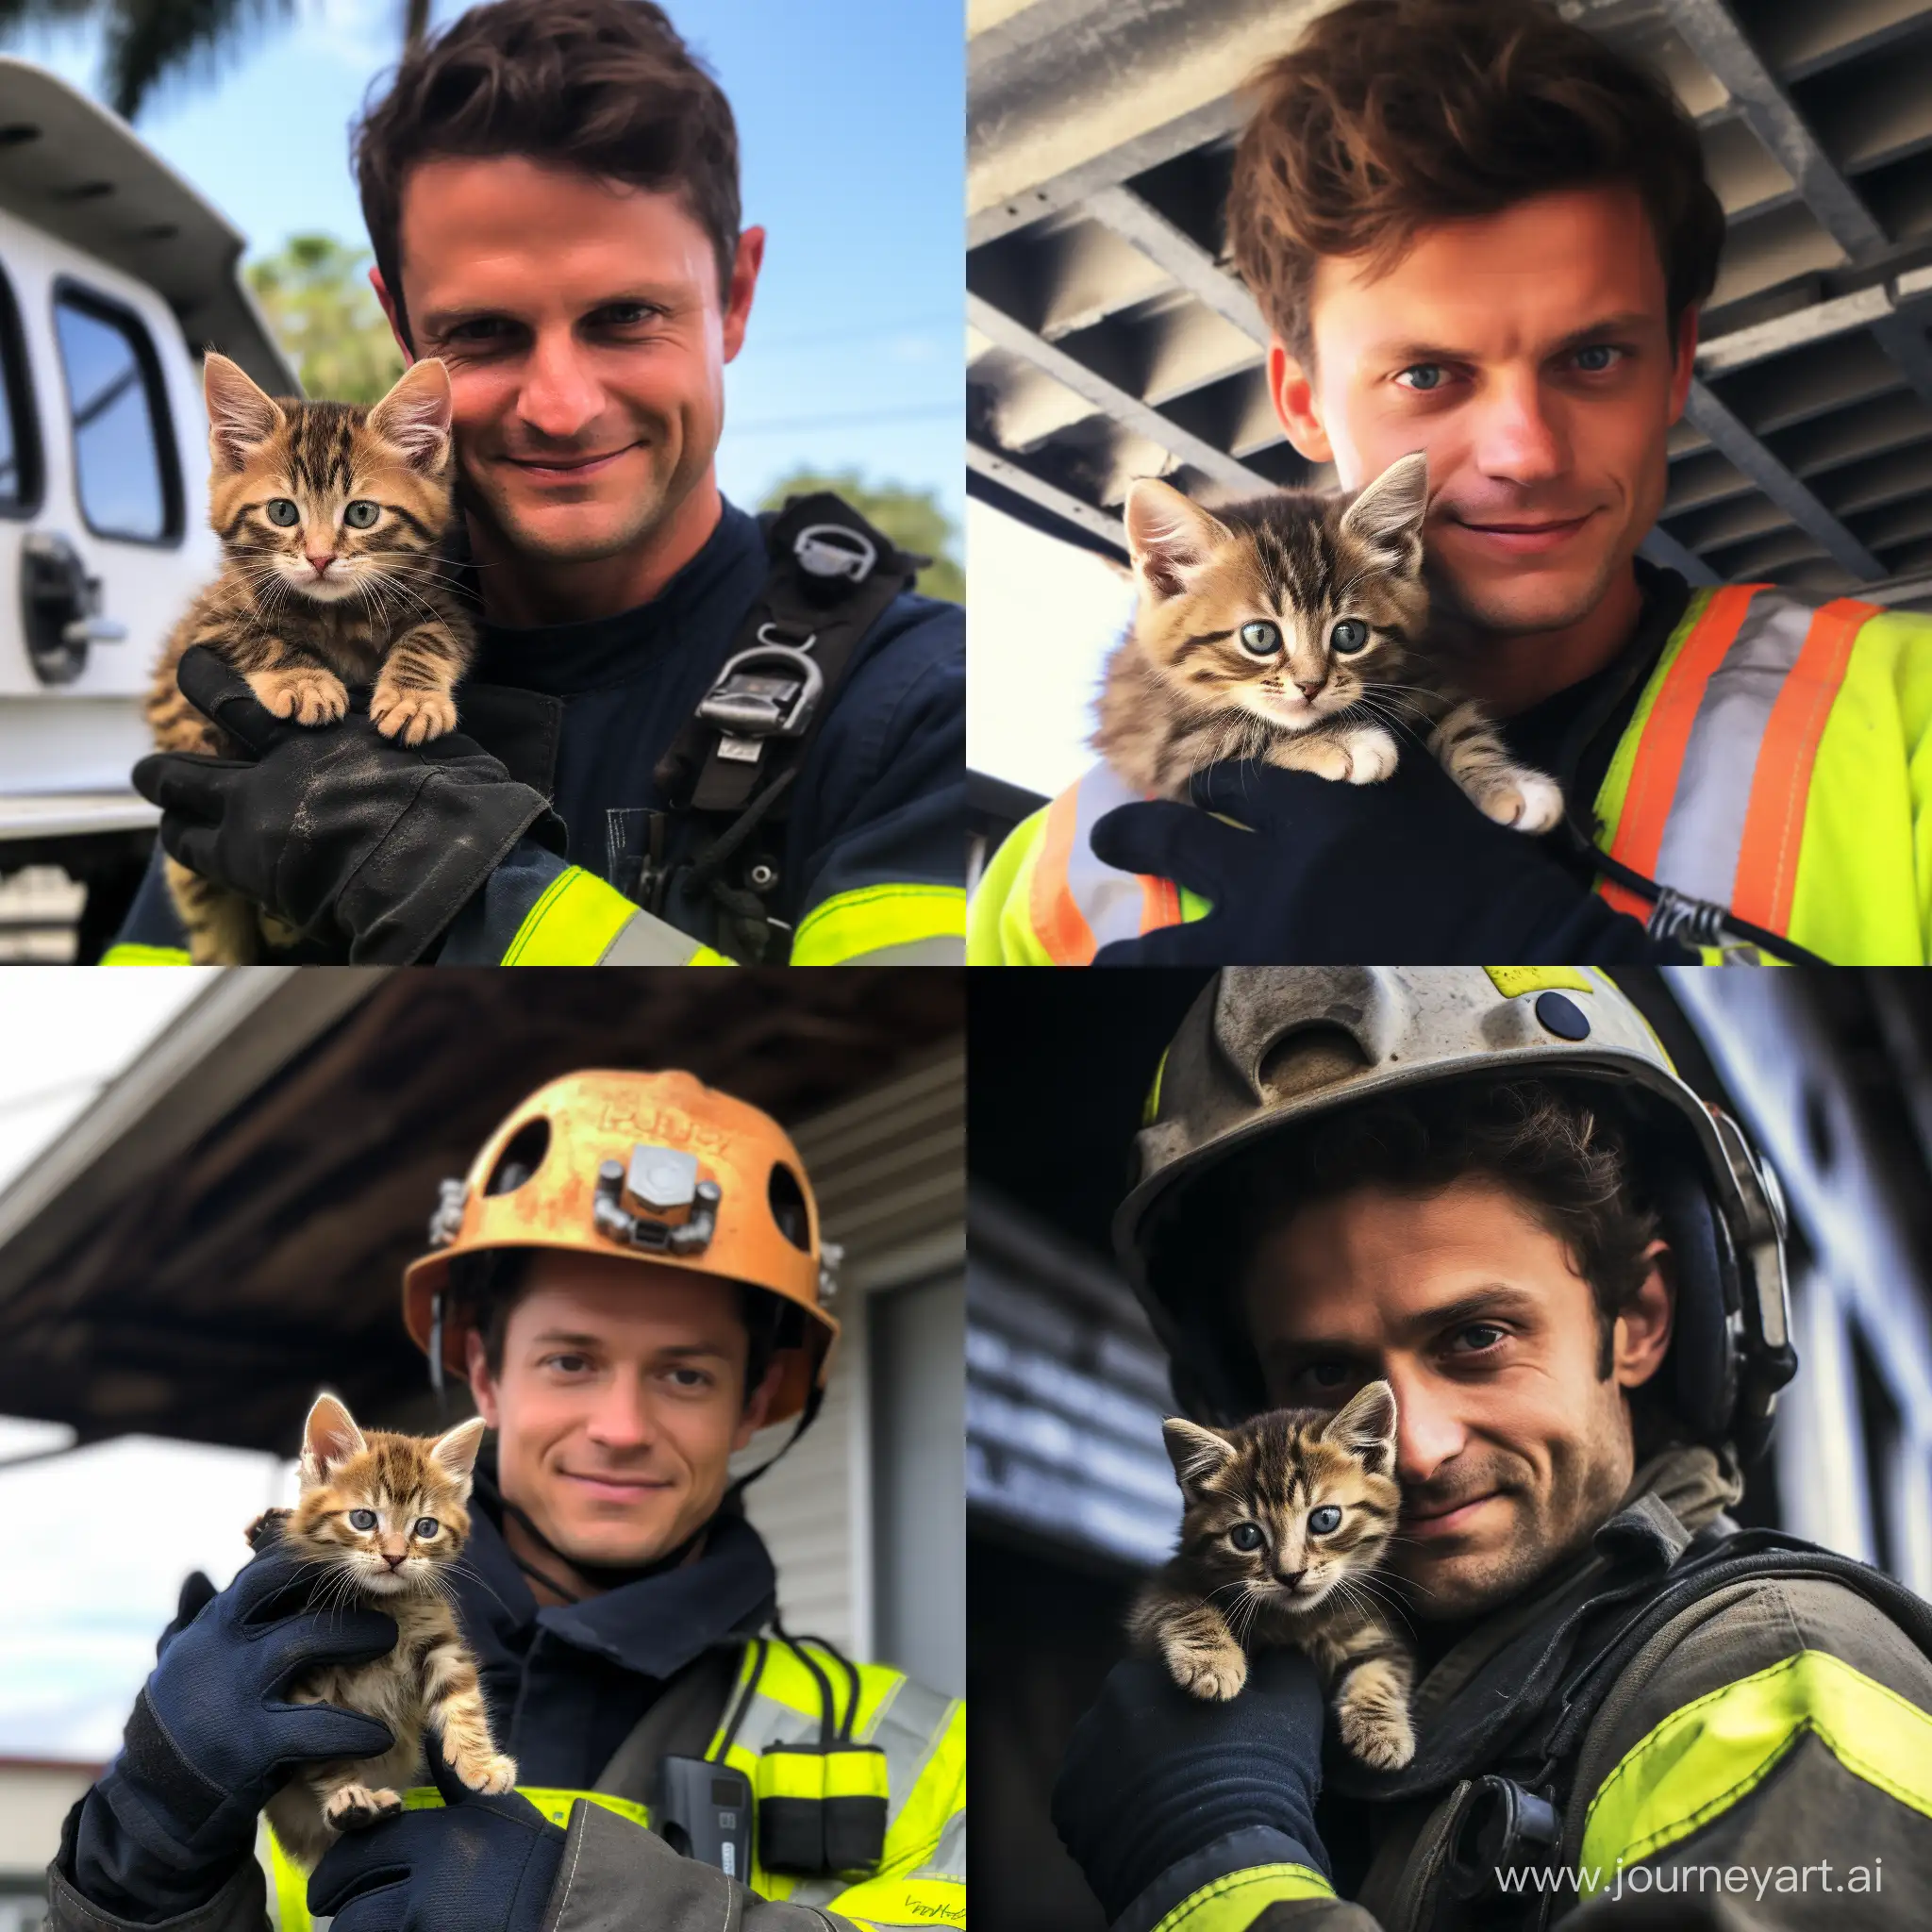 Heroic-Firefighter-Rescues-Adorable-Kitten-from-Flames